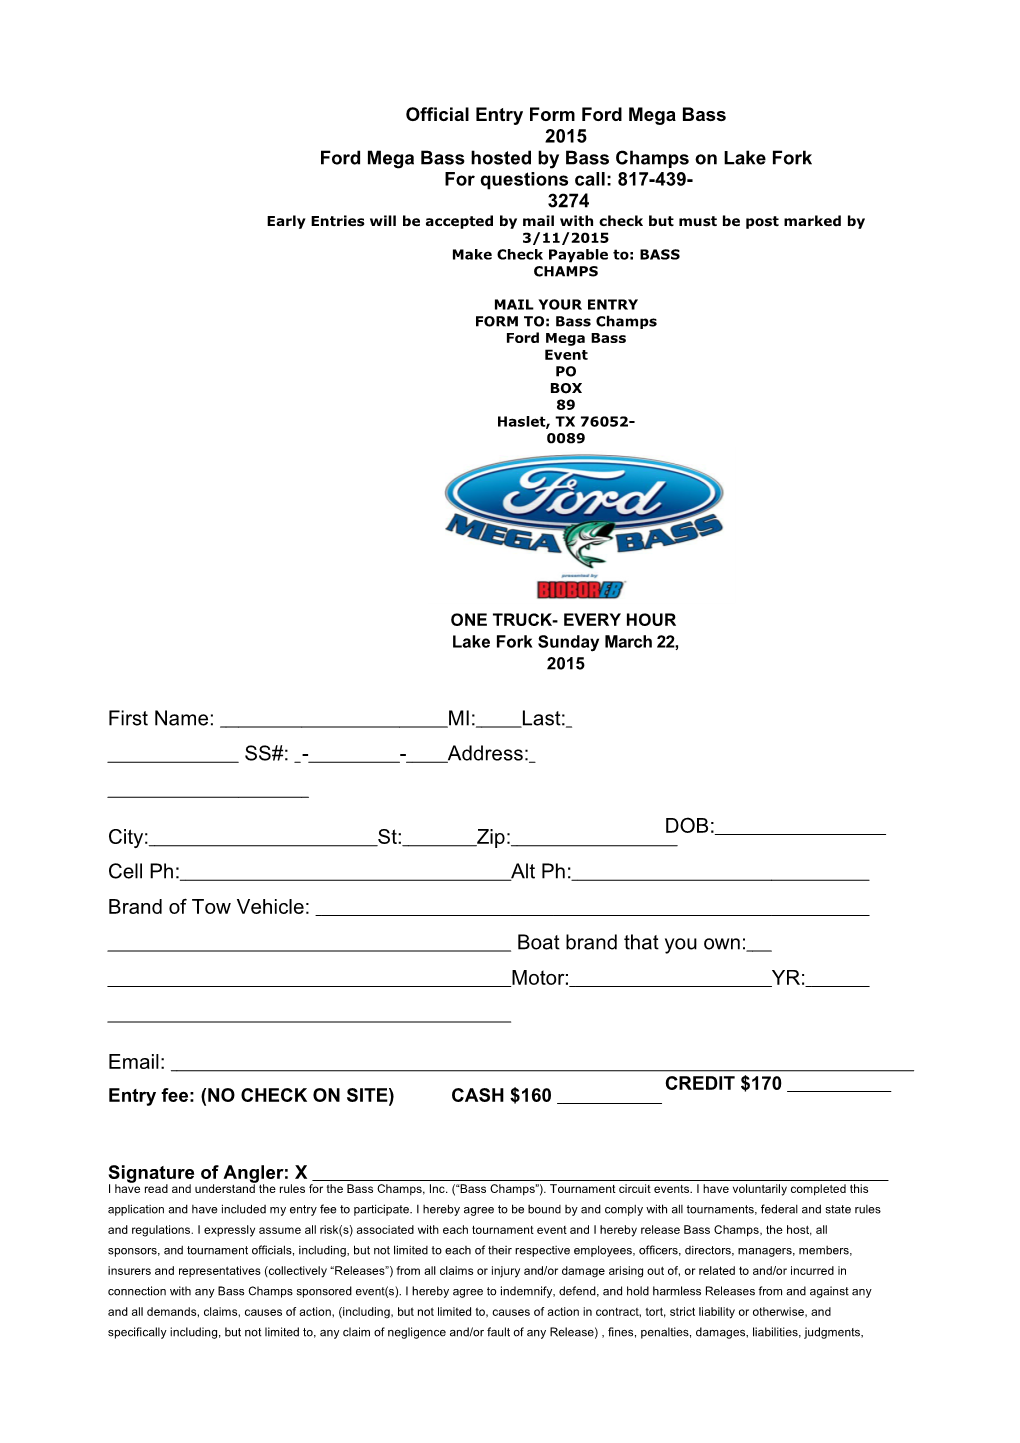 Official Entry Form – Dodge Mega Bass Hosted By Bass Champs On Lake Sam Rayburn